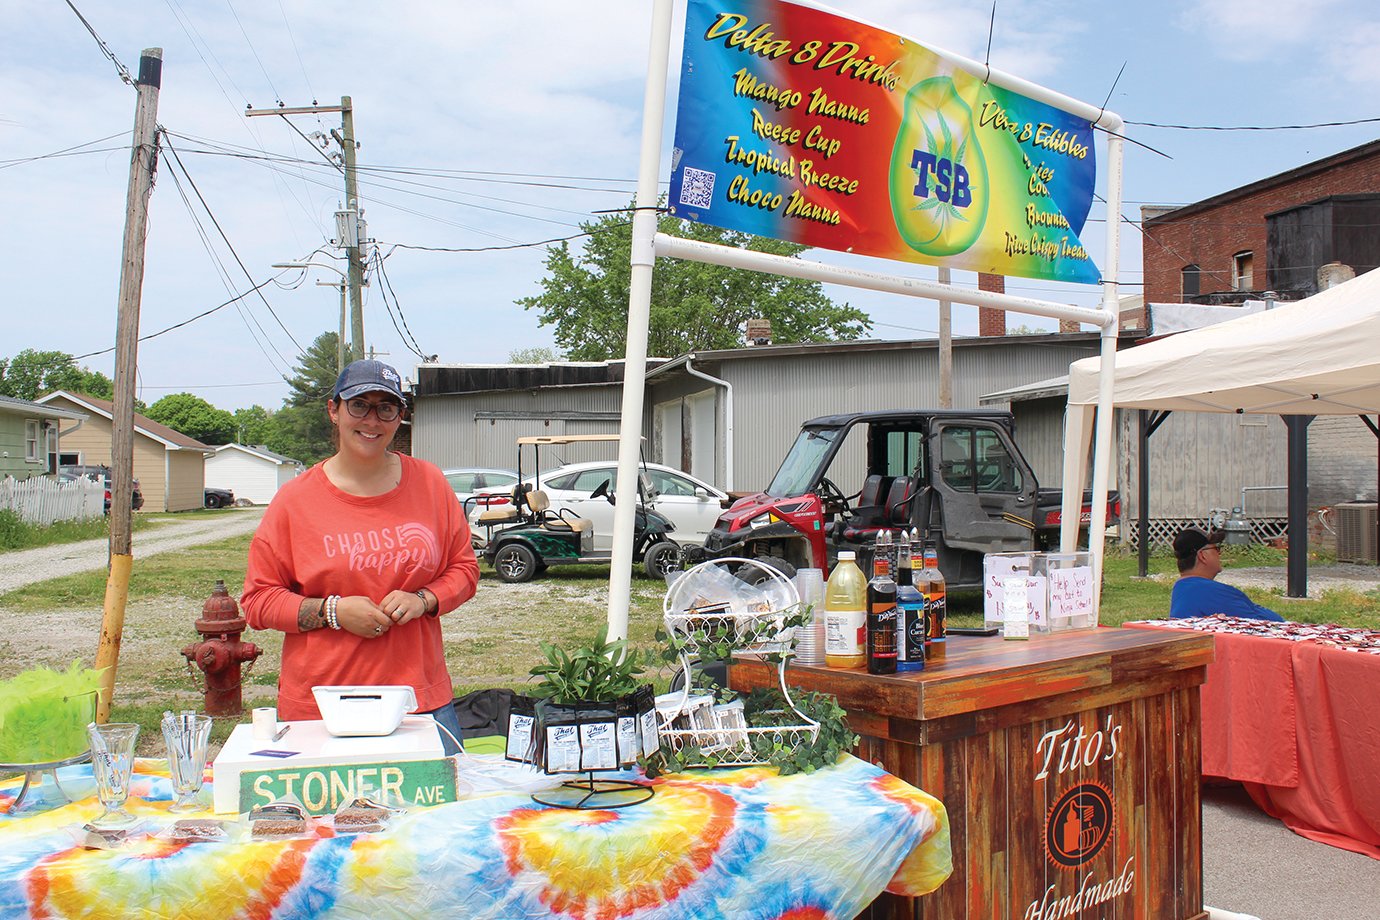 That Sports Bar owner Danielle Hoffman brought her goods from Lebanon on Saturday to the Waynetown Street Festival.